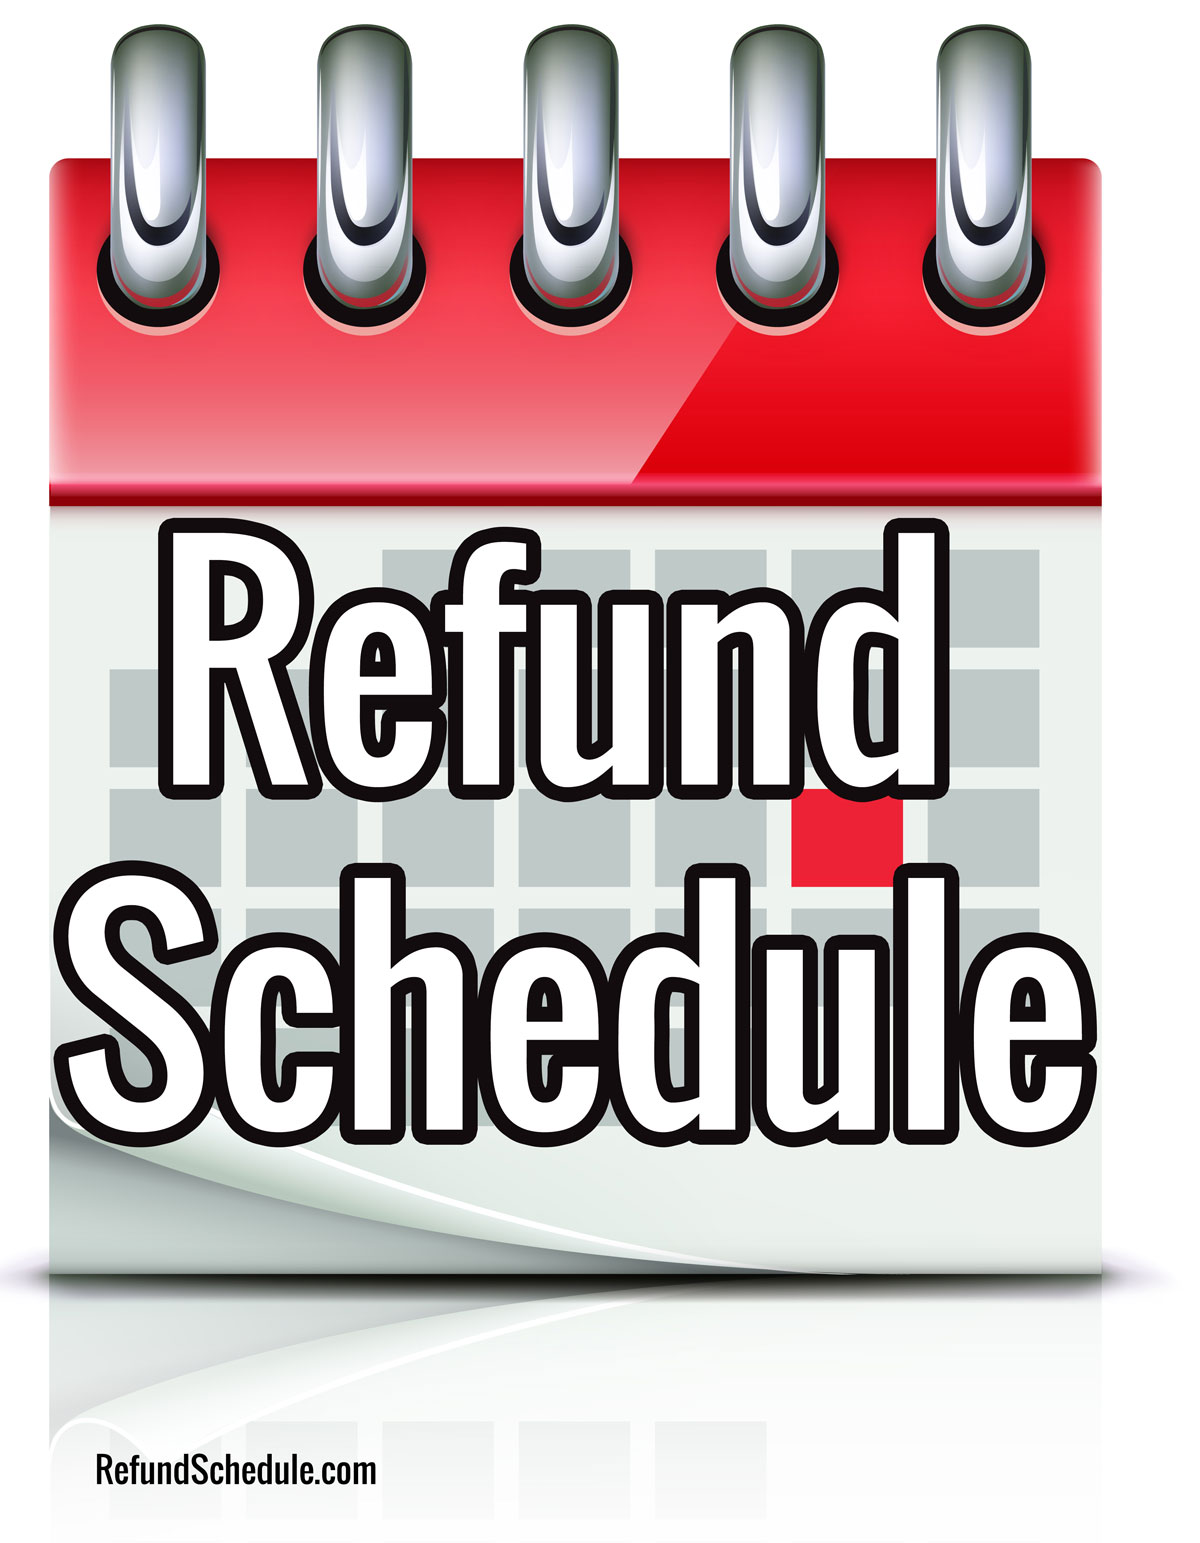 2021 IRS Refund Schedule for your 2020 Tax Return. IRS Refund Cycle